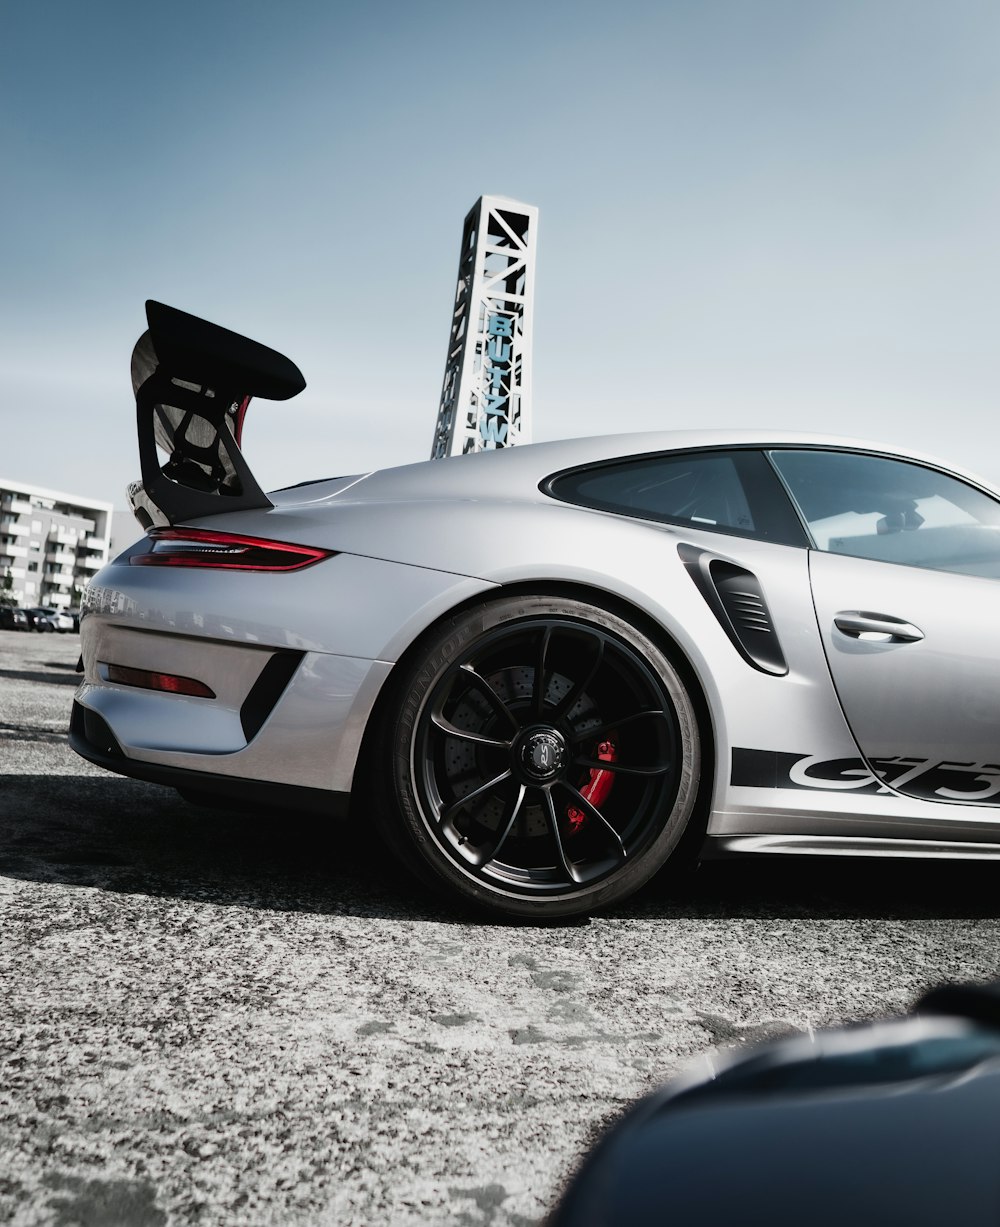 white and black porsche 911 parked on gray concrete pavement during daytime